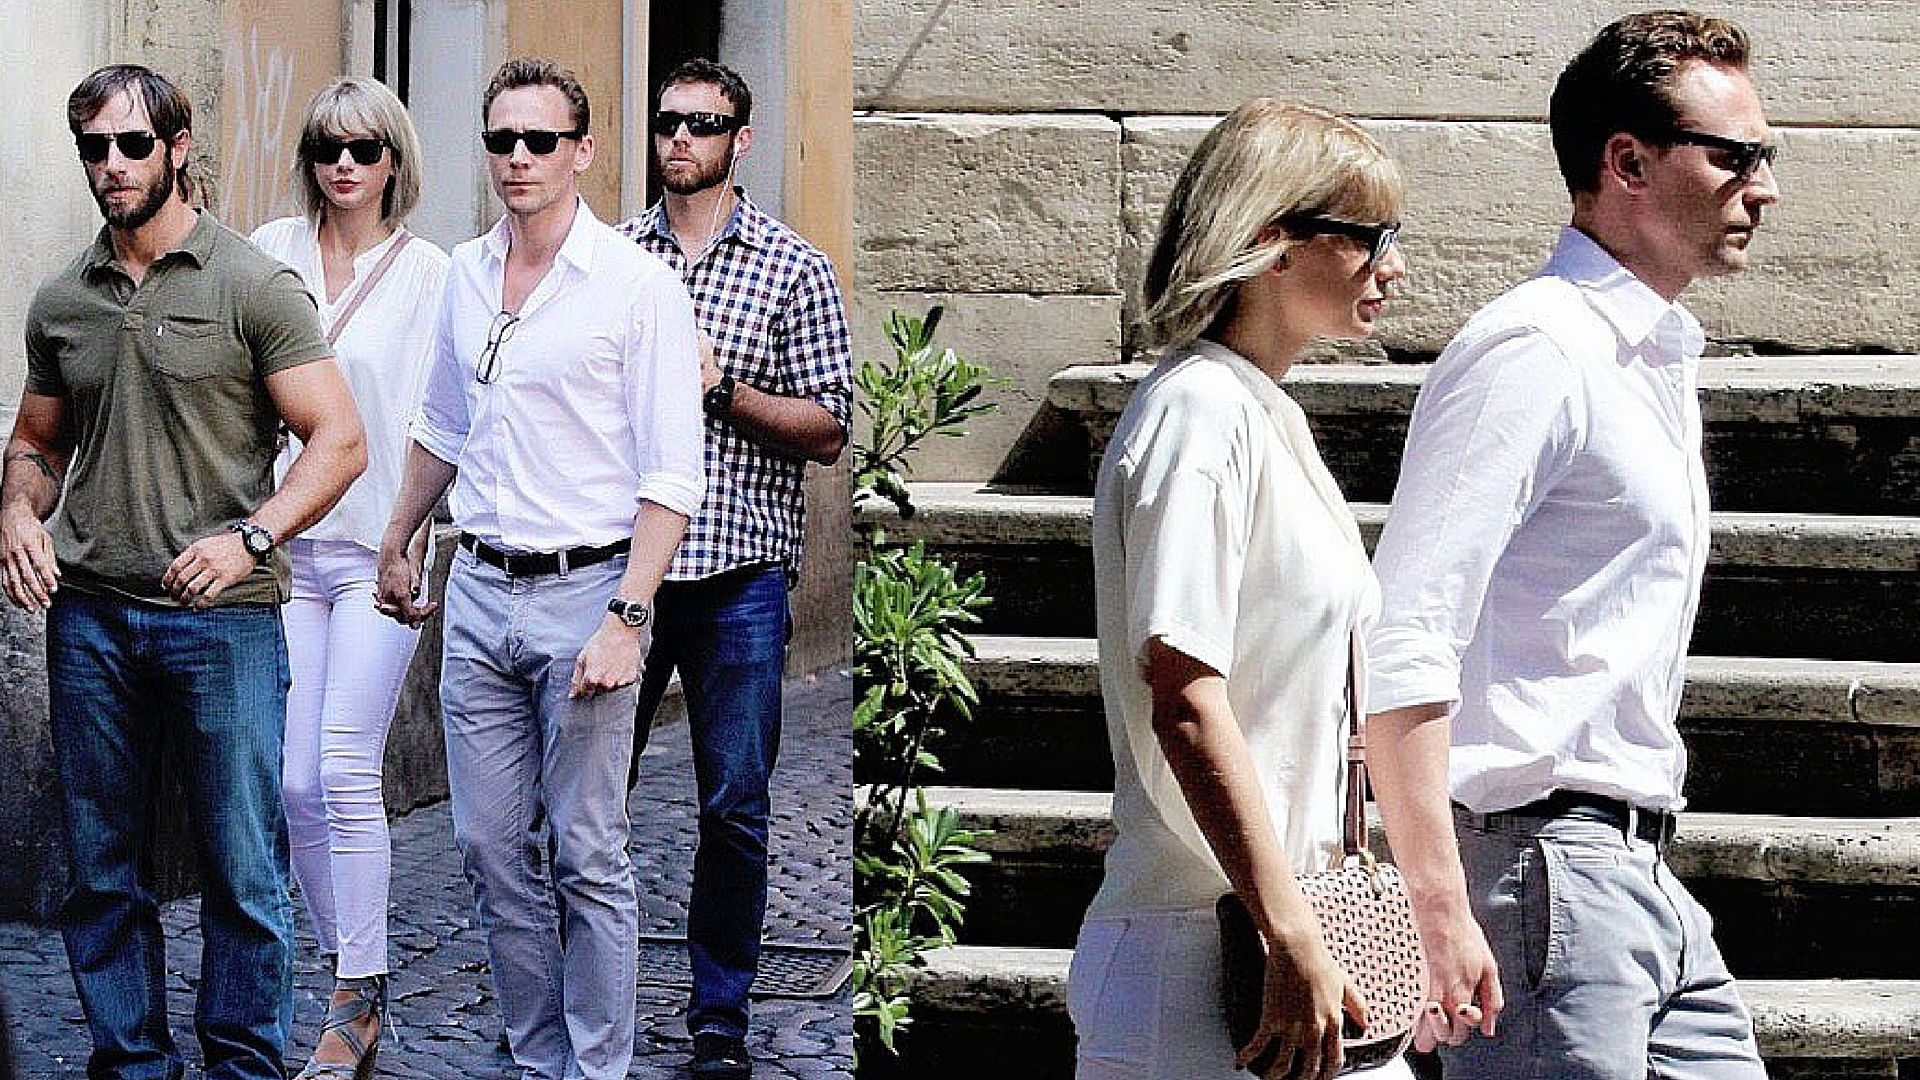 Taylor and Loki in Rome. (Photo Courtesy: <a href="https://twitter.com/TSwiftPR/status/747797904623026176">Twitter/@TSwiftPR</a>)